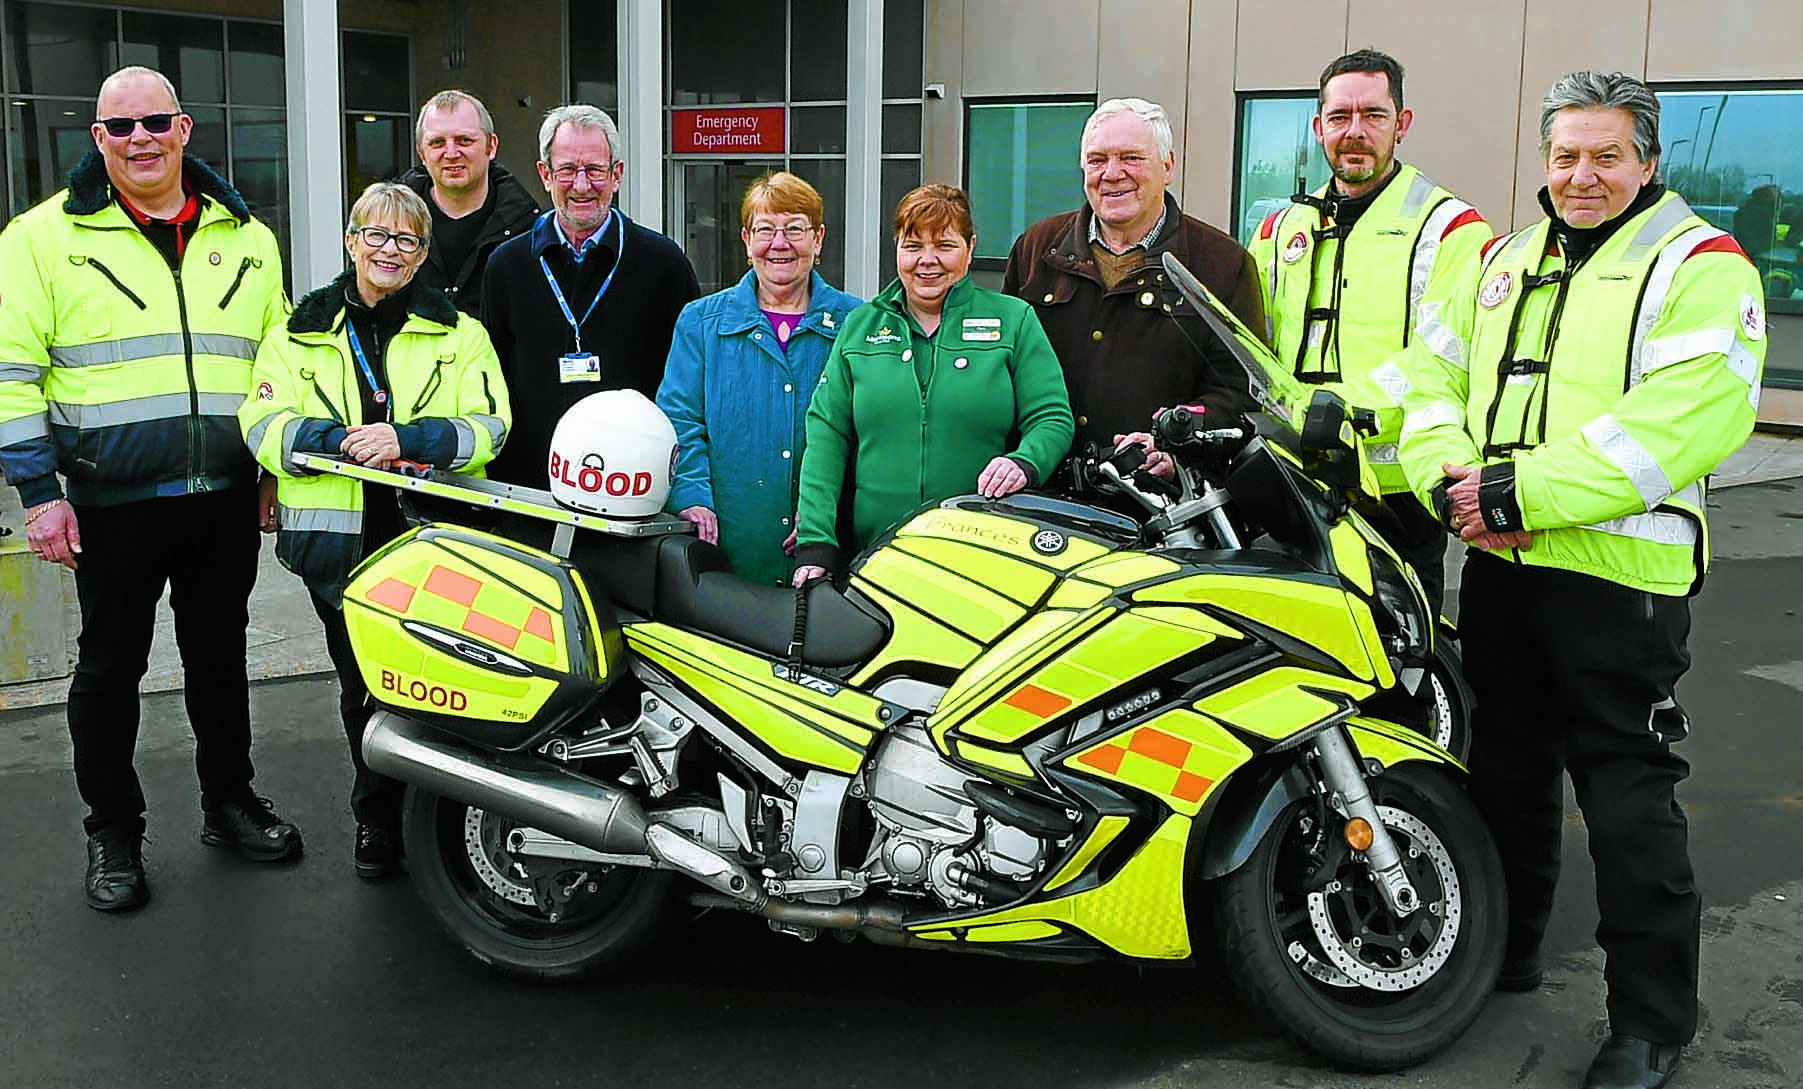 New jackets are a lifesaver for bikers